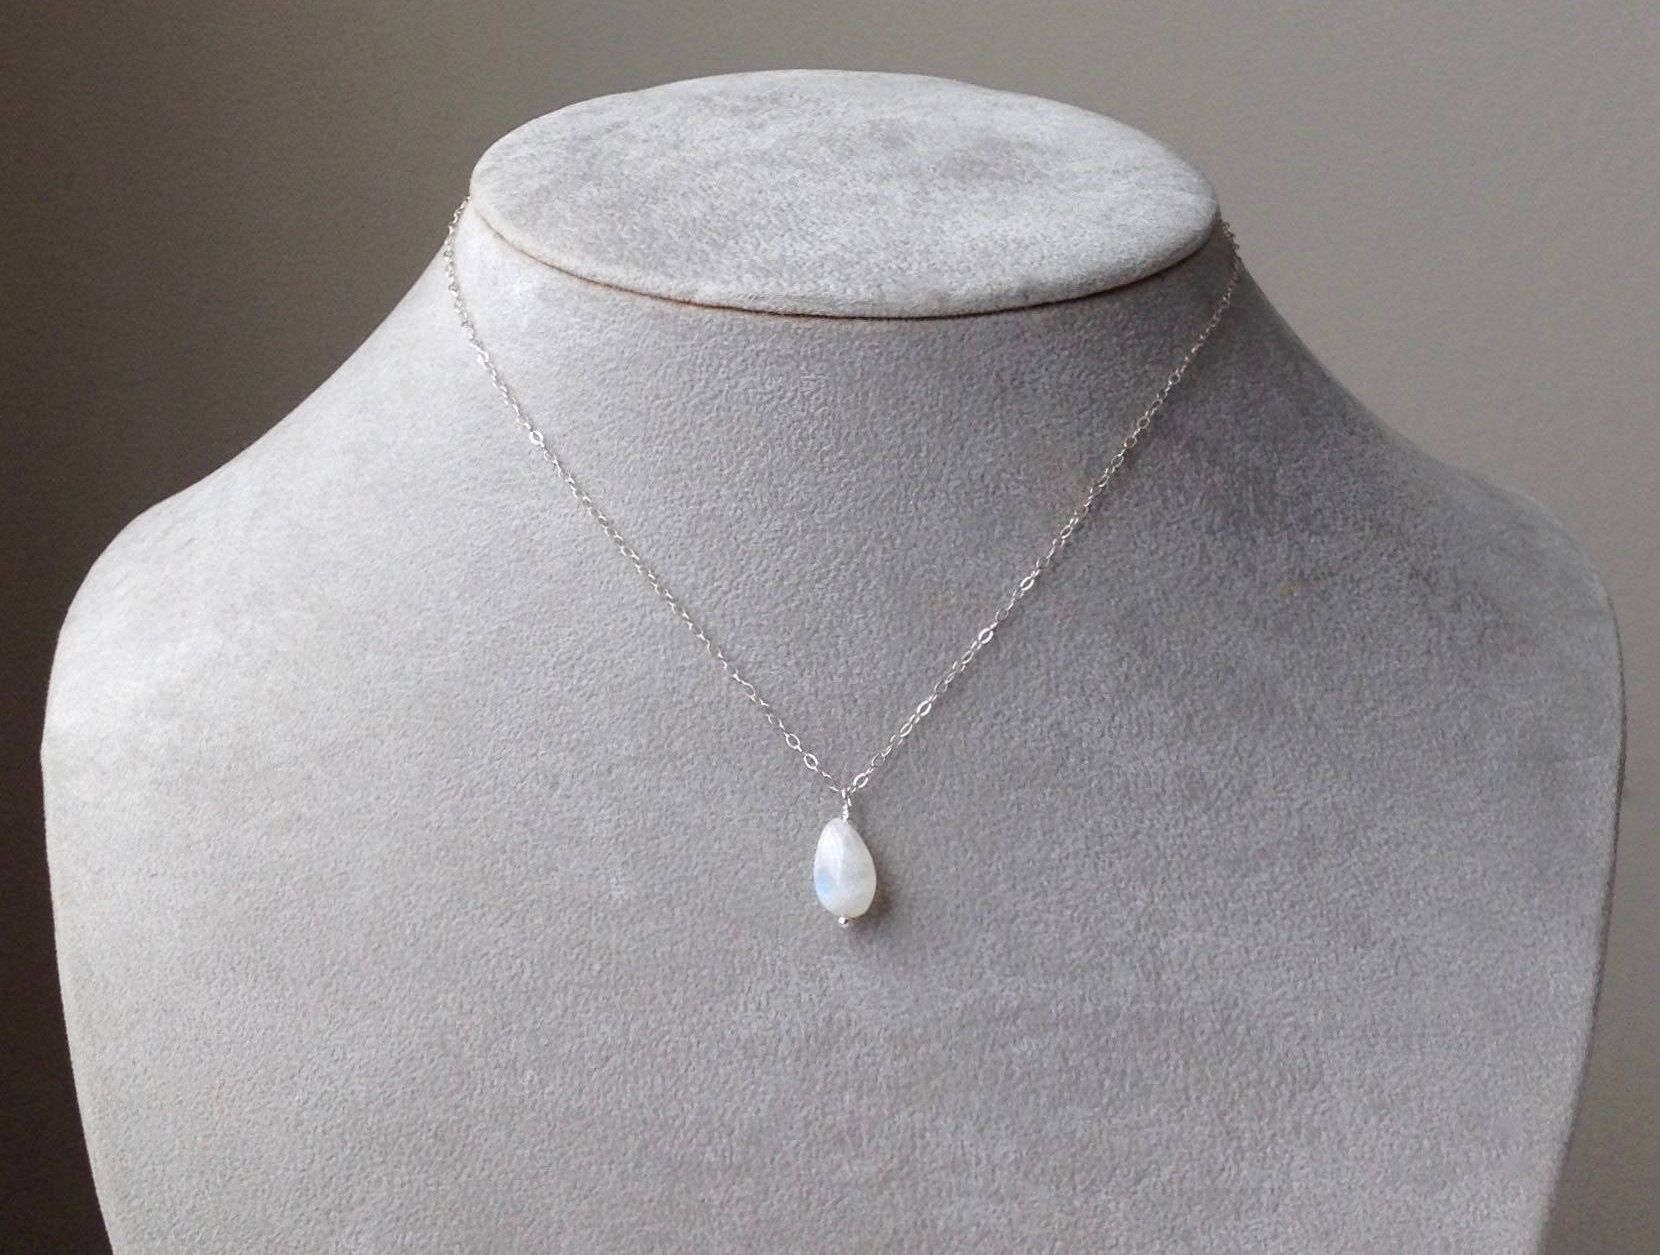 Rainbow Moonstone Sterling Silver Drop Pendant Necklace Iridescent June  Birthstone Gemini White Stone Simple Shiny/oxidized Silver Gift Wrap With Regard To Recent Grey Moonstone June Droplet Pendant Necklaces (View 5 of 25)